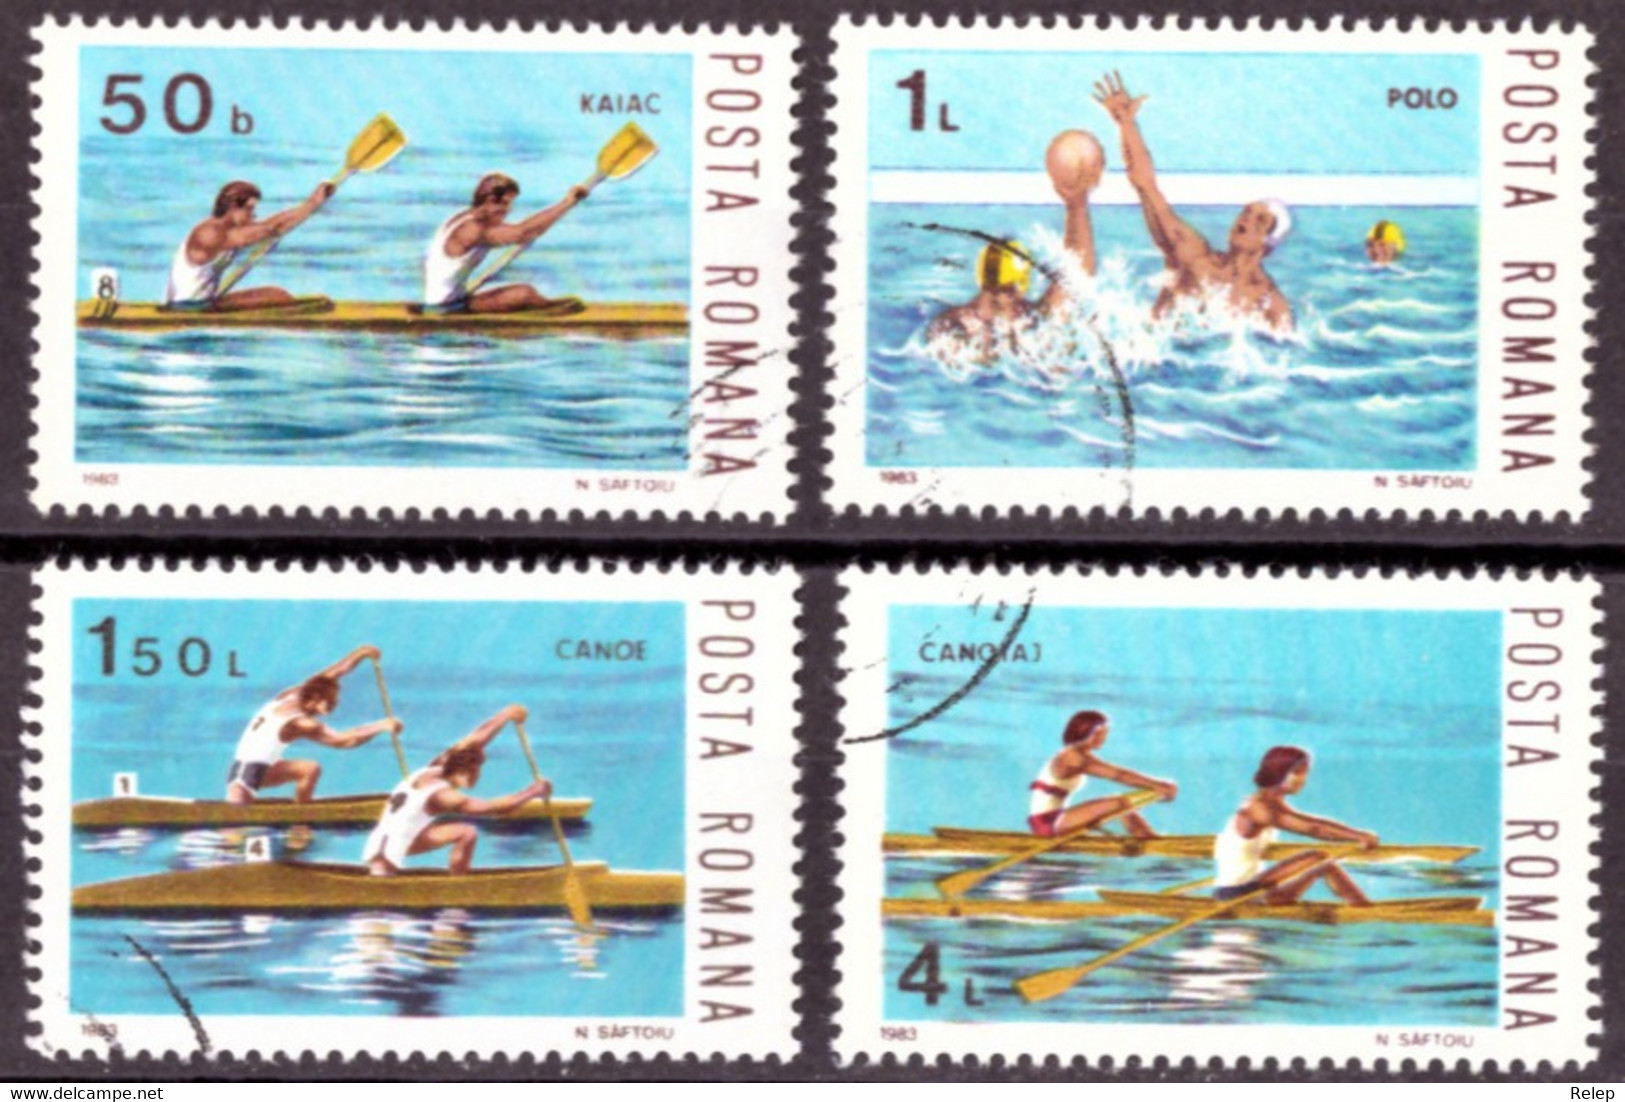 Water Sports, Competition - Lot 1326 -TB- - Wasserball